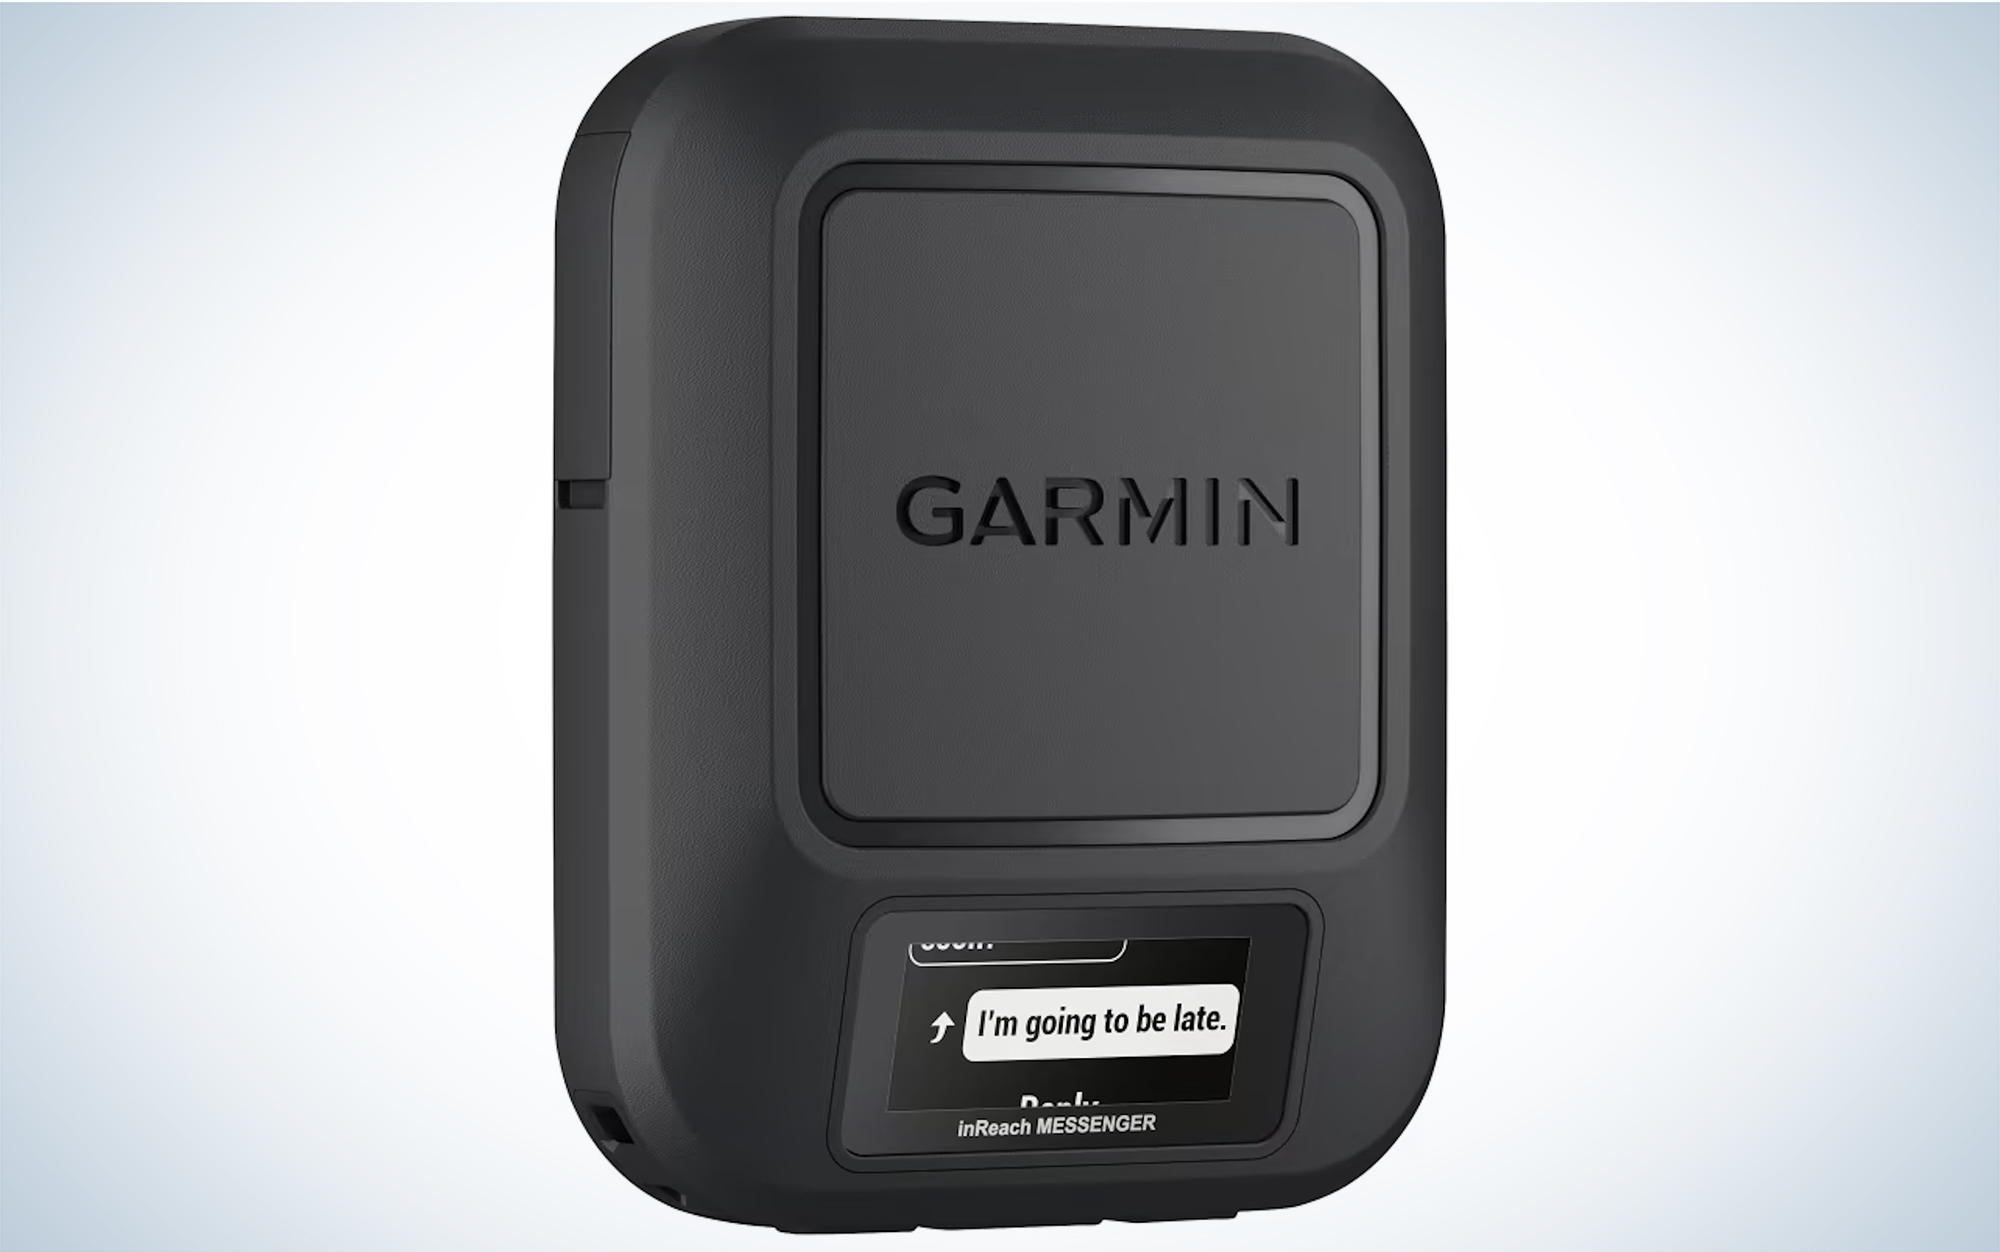 The Garmin Messenger is one of the best satellite messagers.